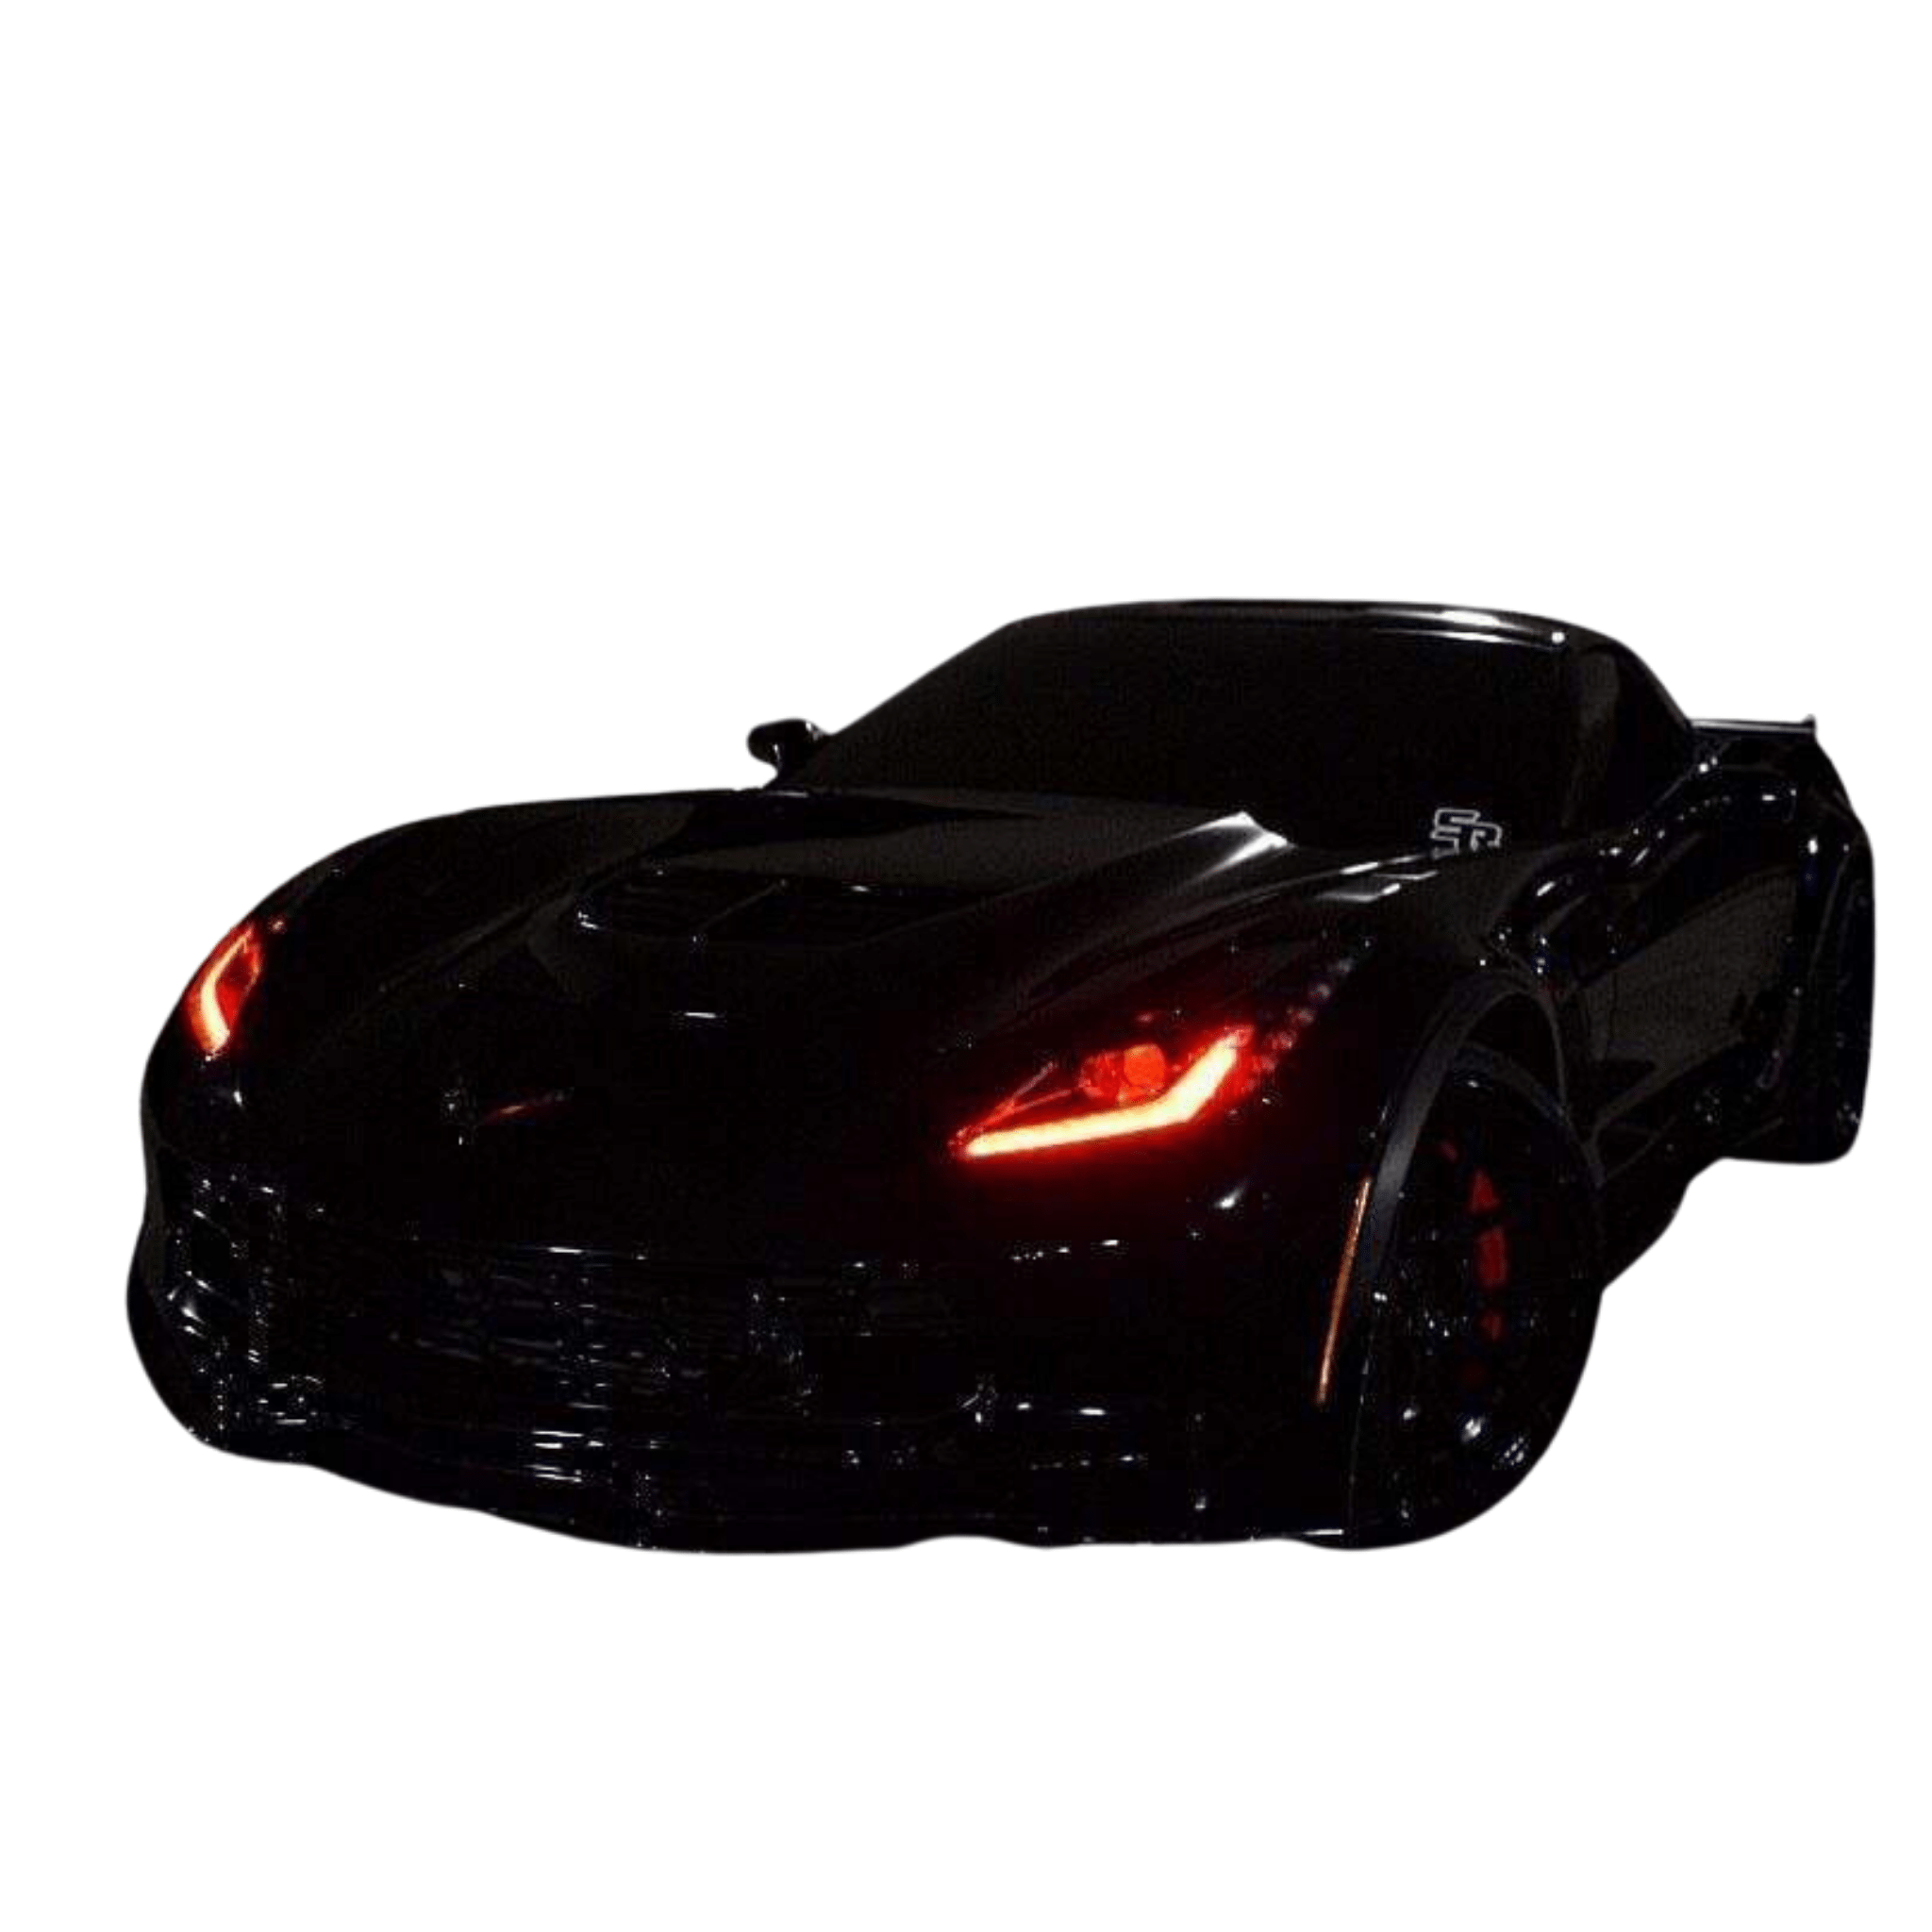 2014-2019 Chevrolet Corvette RGBW DRL Boards - RGB Halo Kits Multicolor Flow Series Color Chasing RGBWA LED headlight kit Oracle Lighting Trendz OneUpLighting Morimoto theretrofitsource AutoLEDTech Diode Dynamics